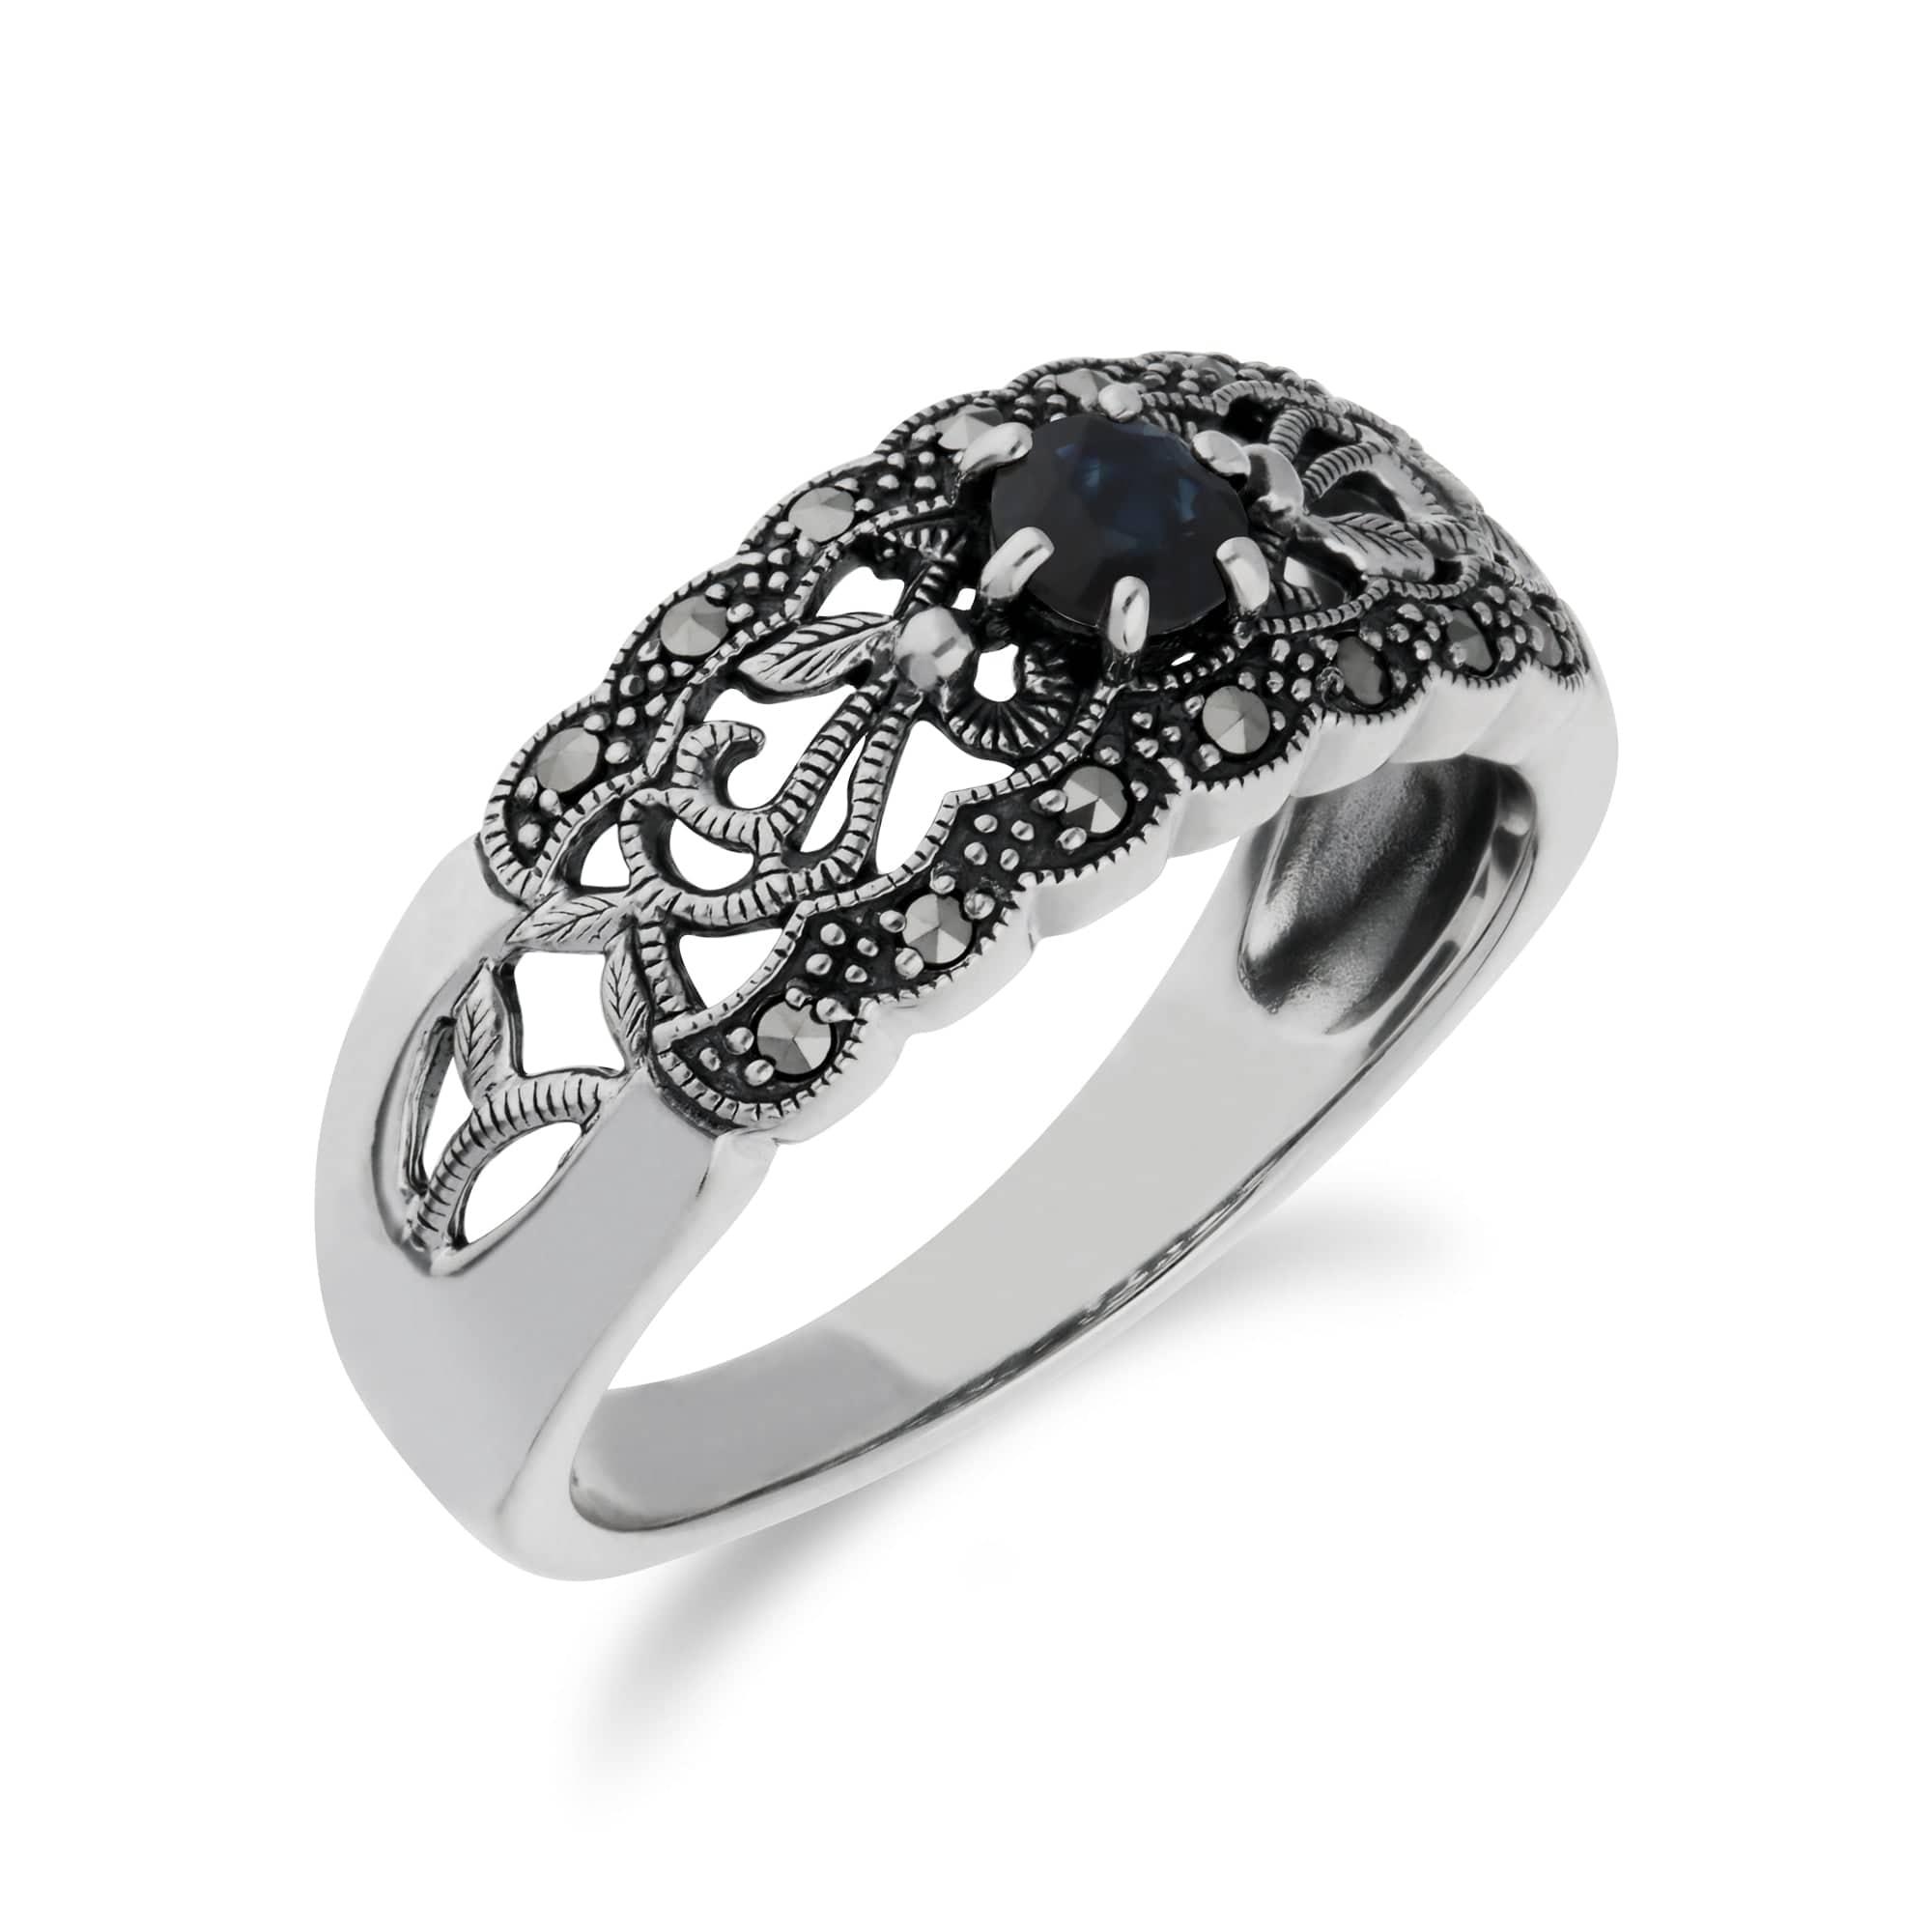 214R597704925 Art Nouveau Style Round Sapphire & Marcasite Floral Band Ring in Sterling Silver 3